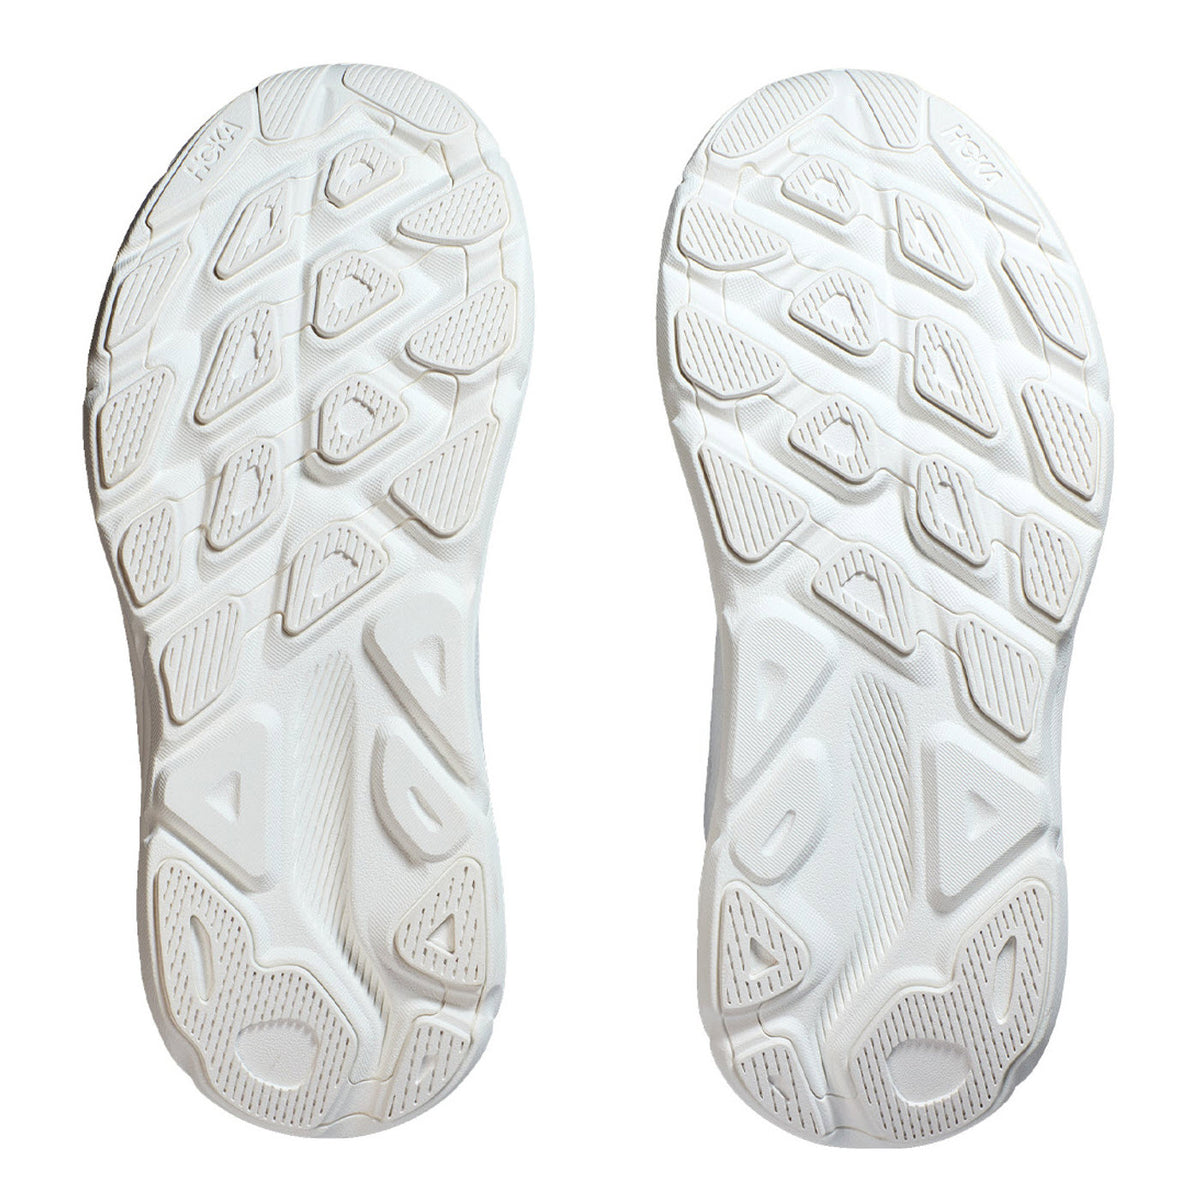 Pair of HOKA Clifton 9 rubber soles against a white background.